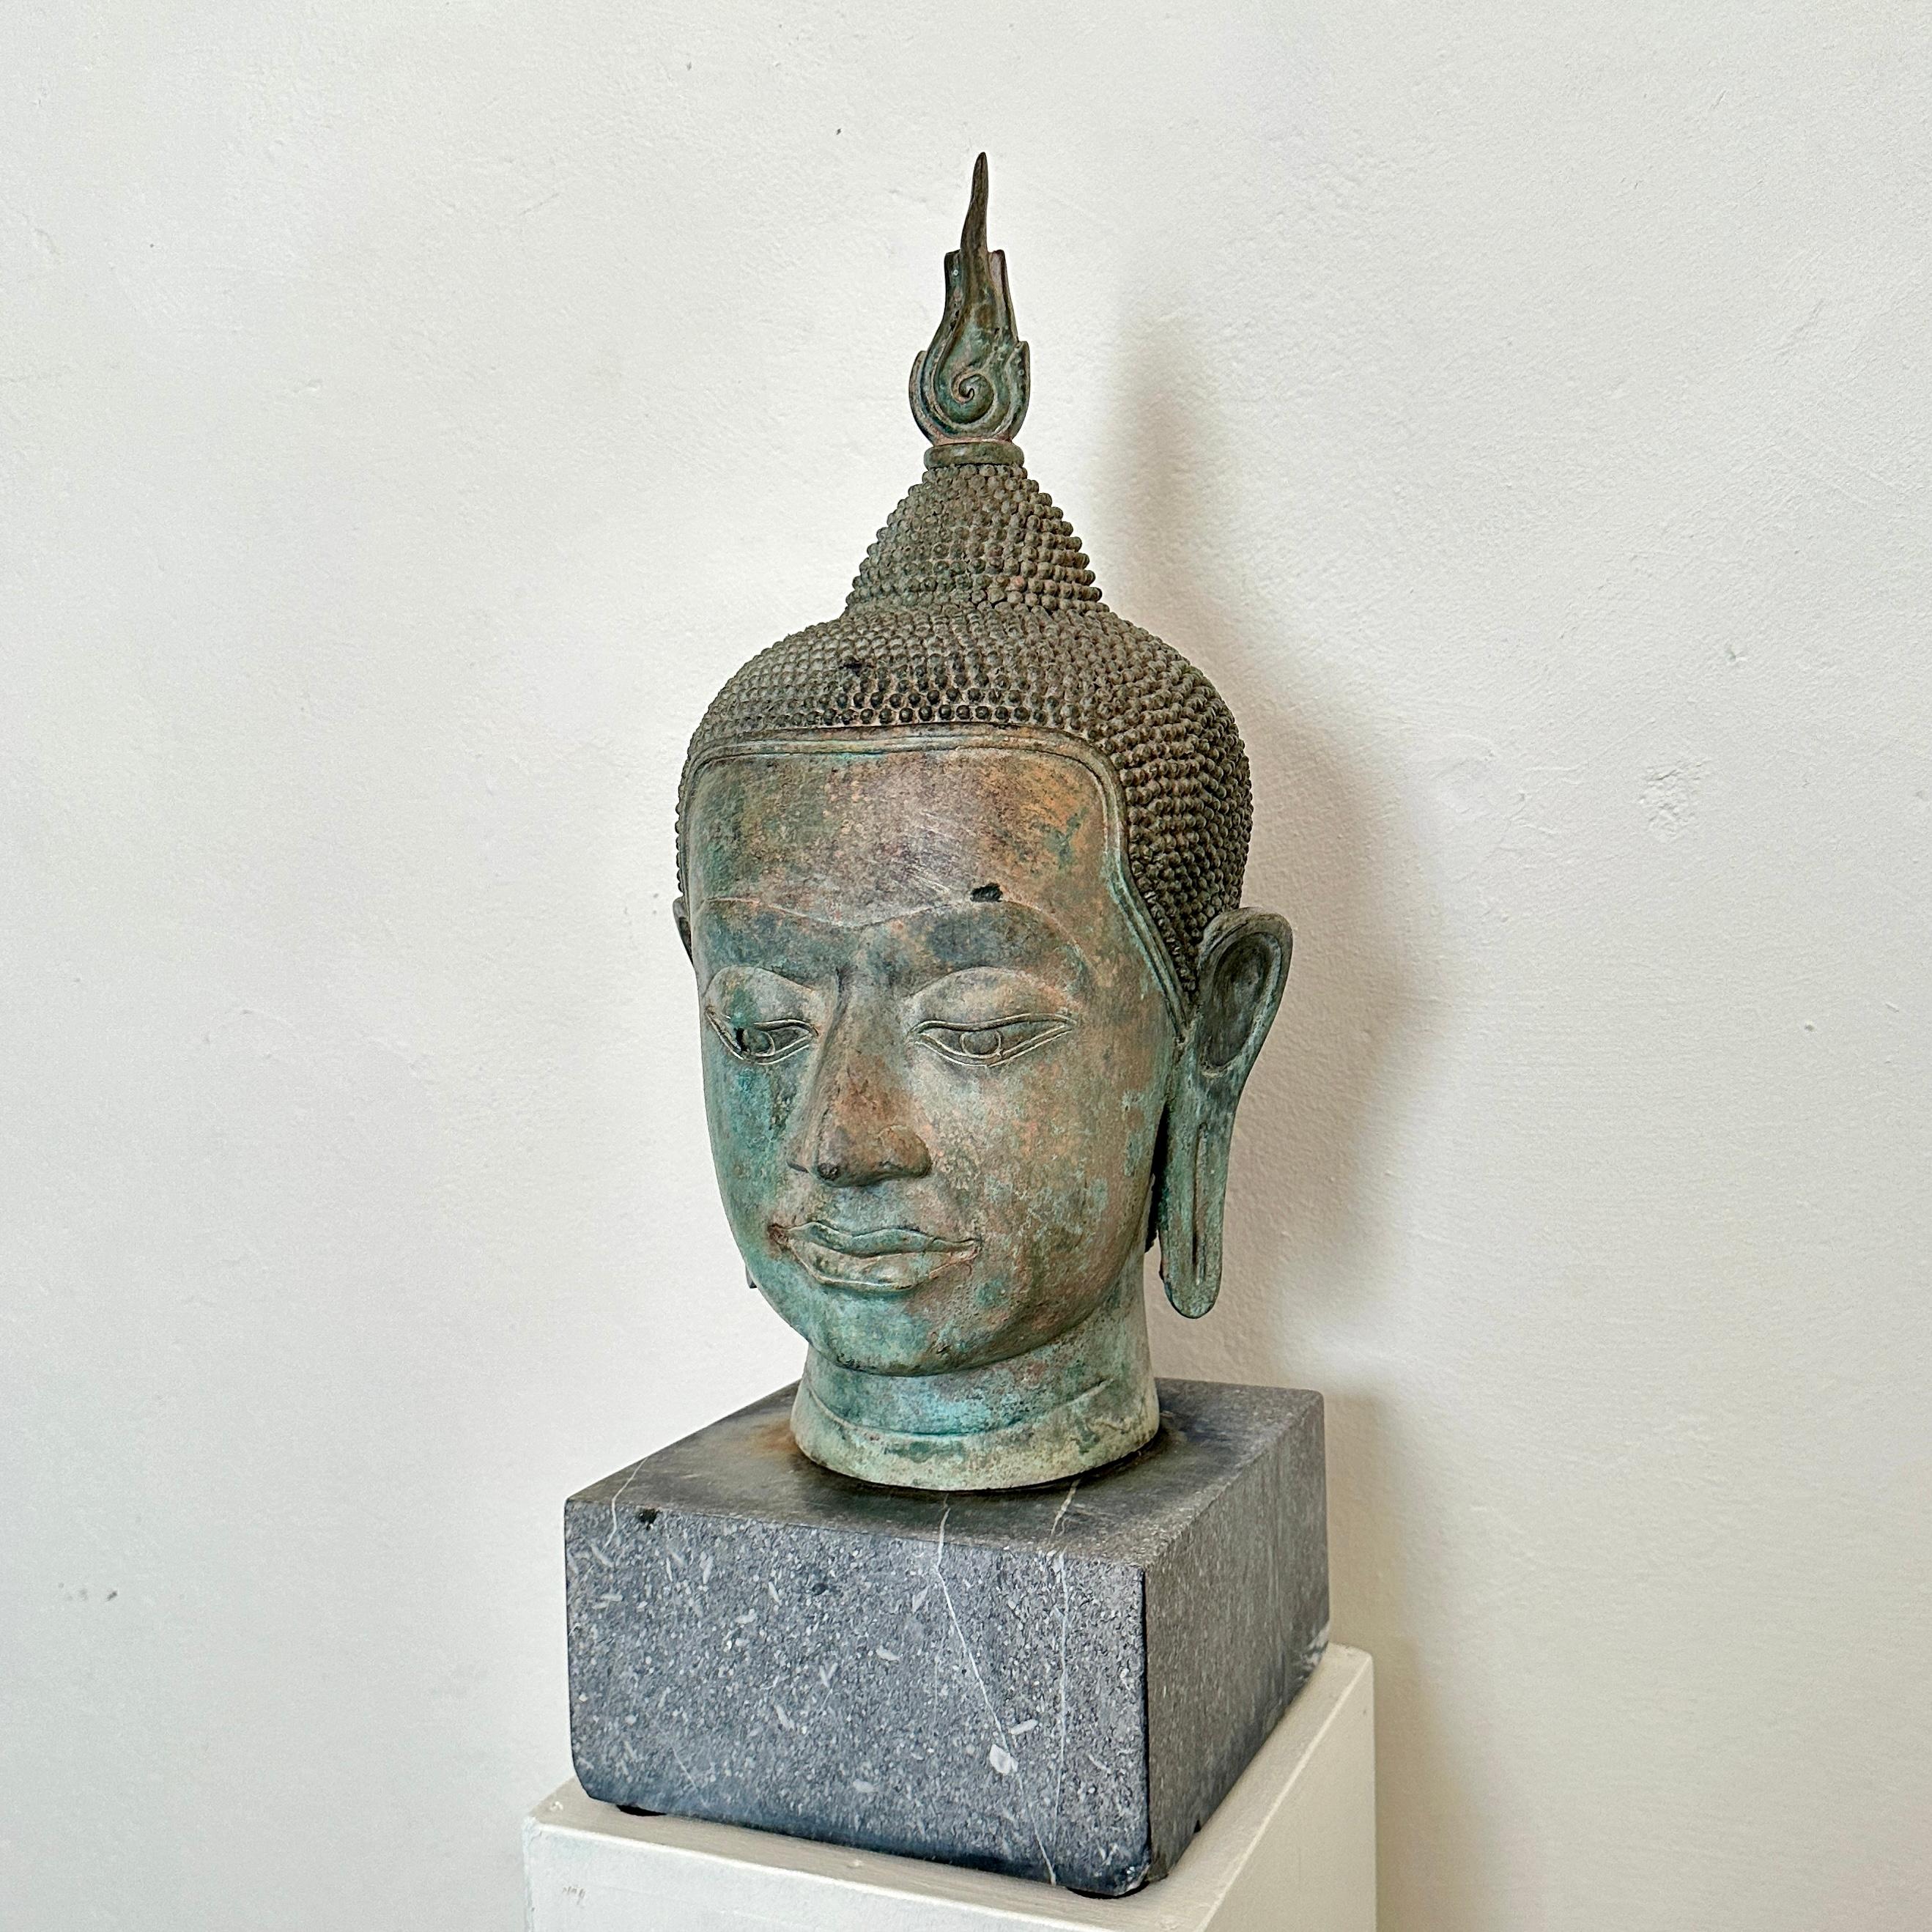 Emanating tranquility and timeless beauty, this 1940s Cast Bronze Sukhothai-Buddha Head rests serenely atop a distinguished grey granite base. A fusion of artistic mastery and spiritual significance, the exquisite craftsmanship captures the essence